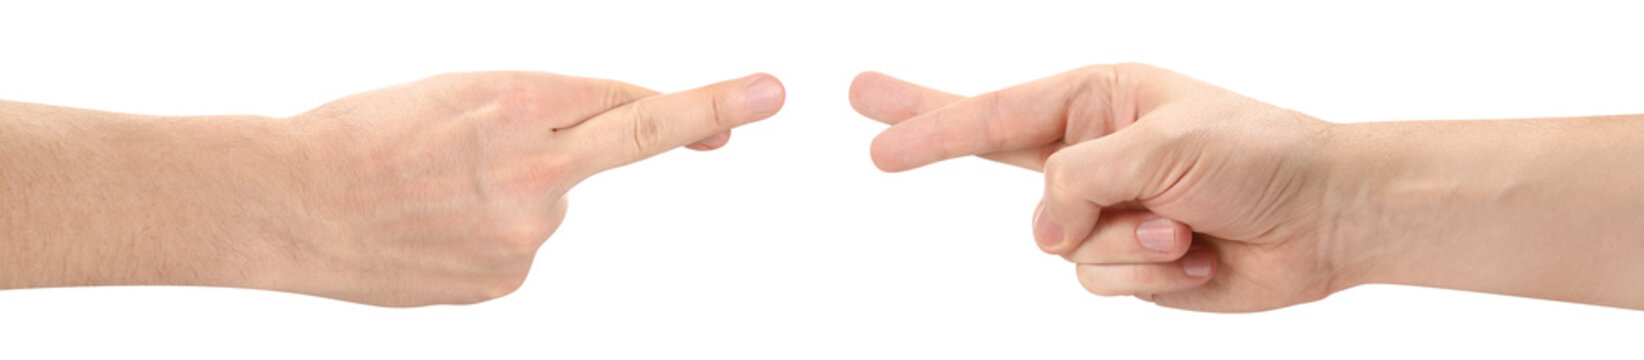 Hands showing cheating signs, cut out